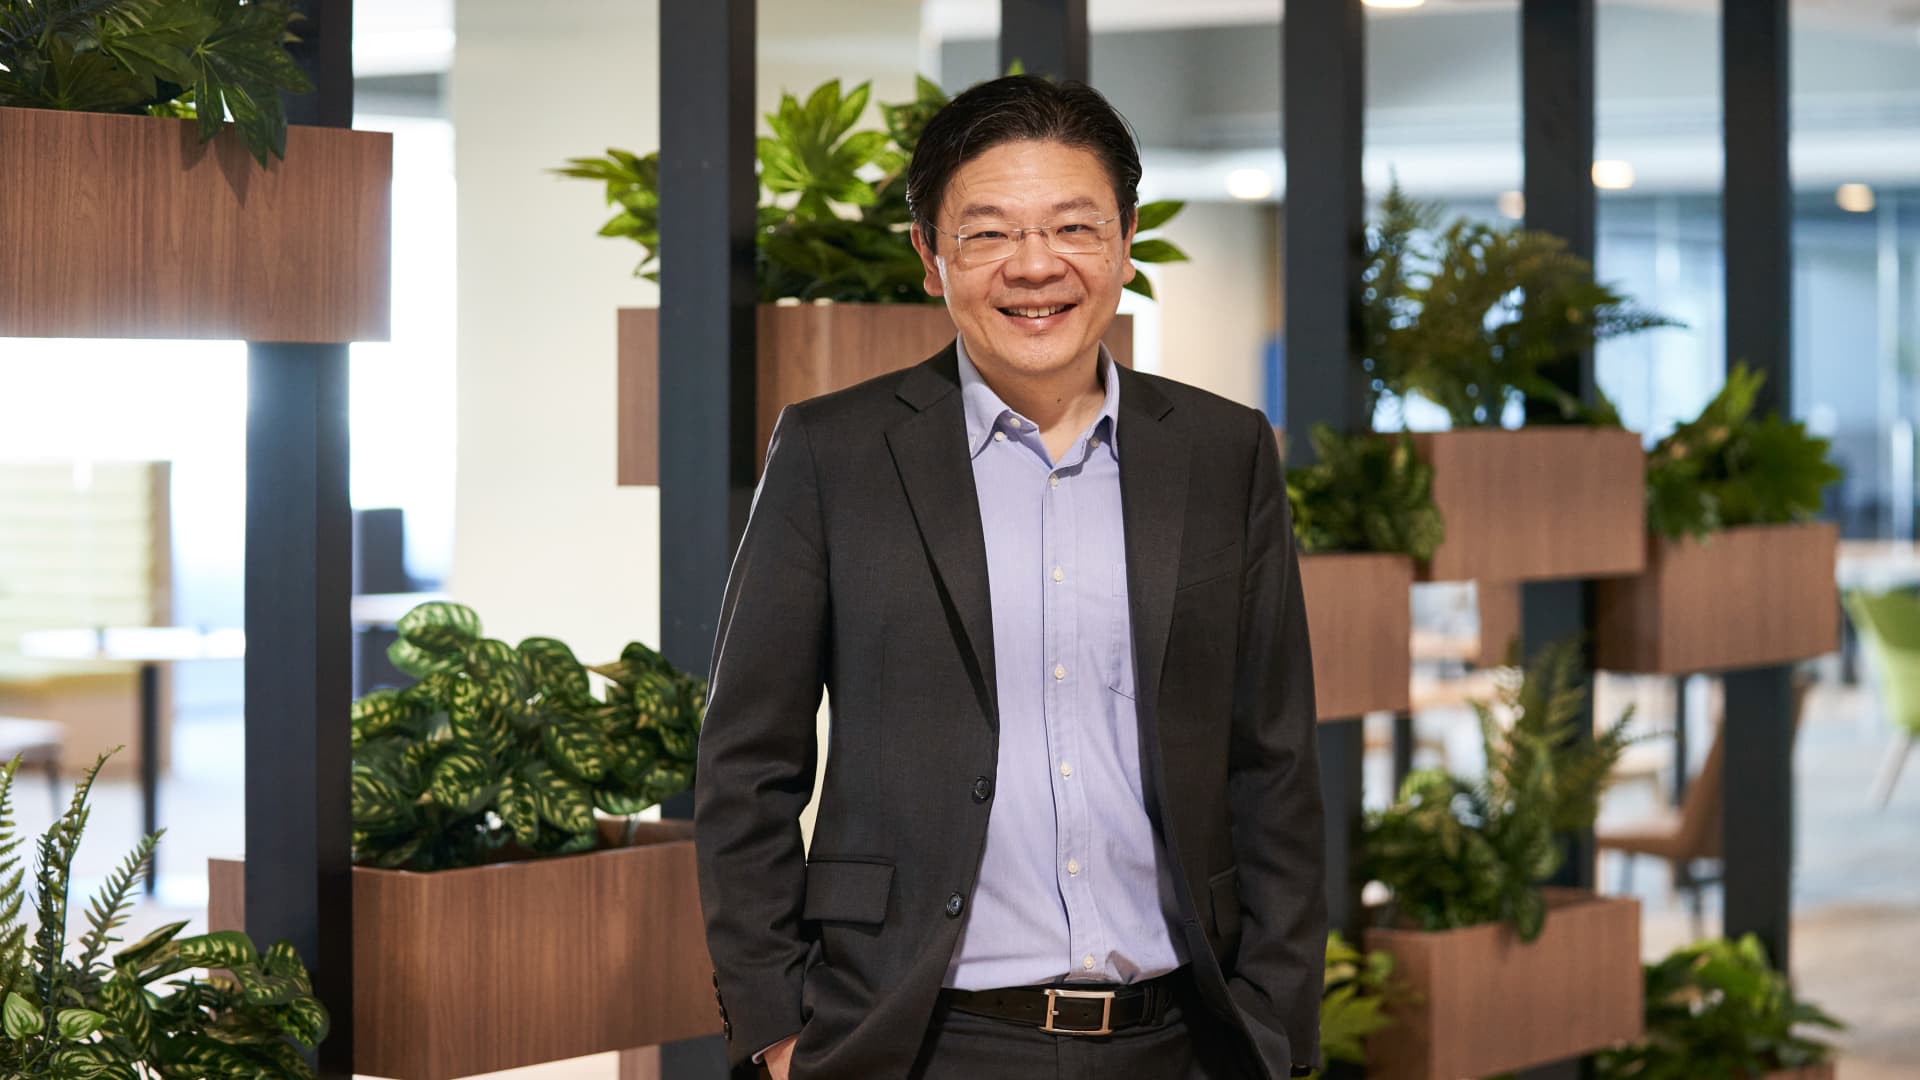 Singapore names Deputy Prime Minister Lawrence Wong as chairman of the central bank